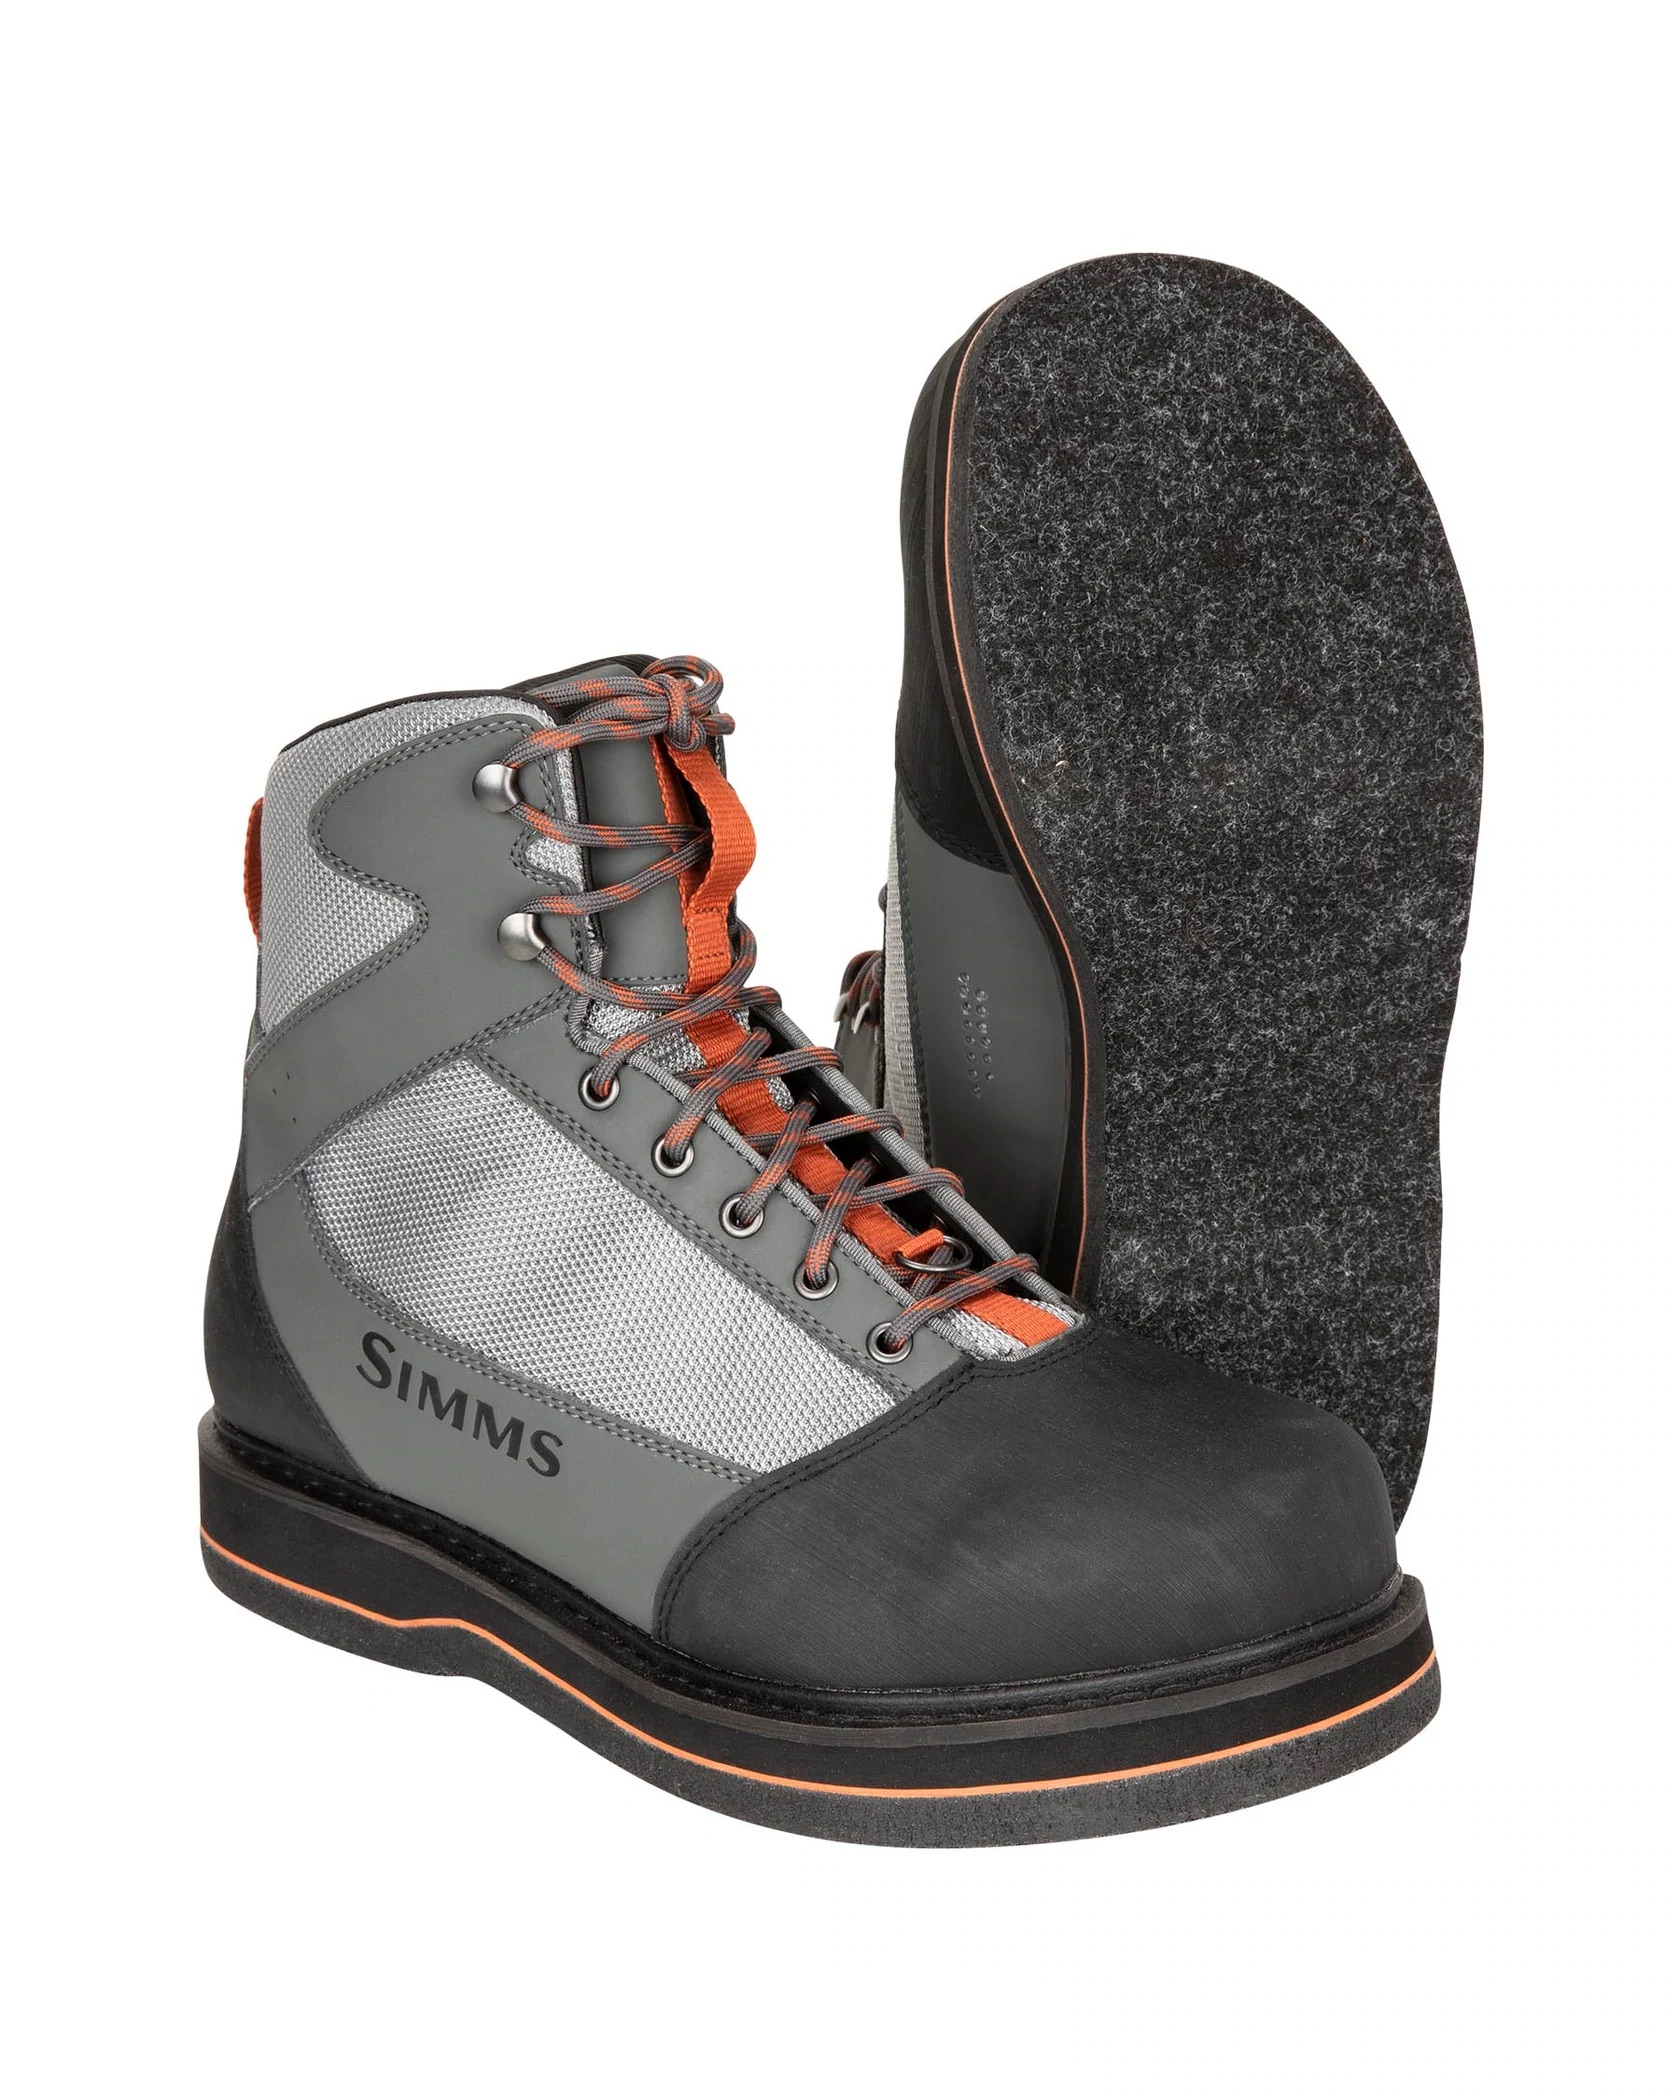 Simms Tributary Boot - Felt - Size 11